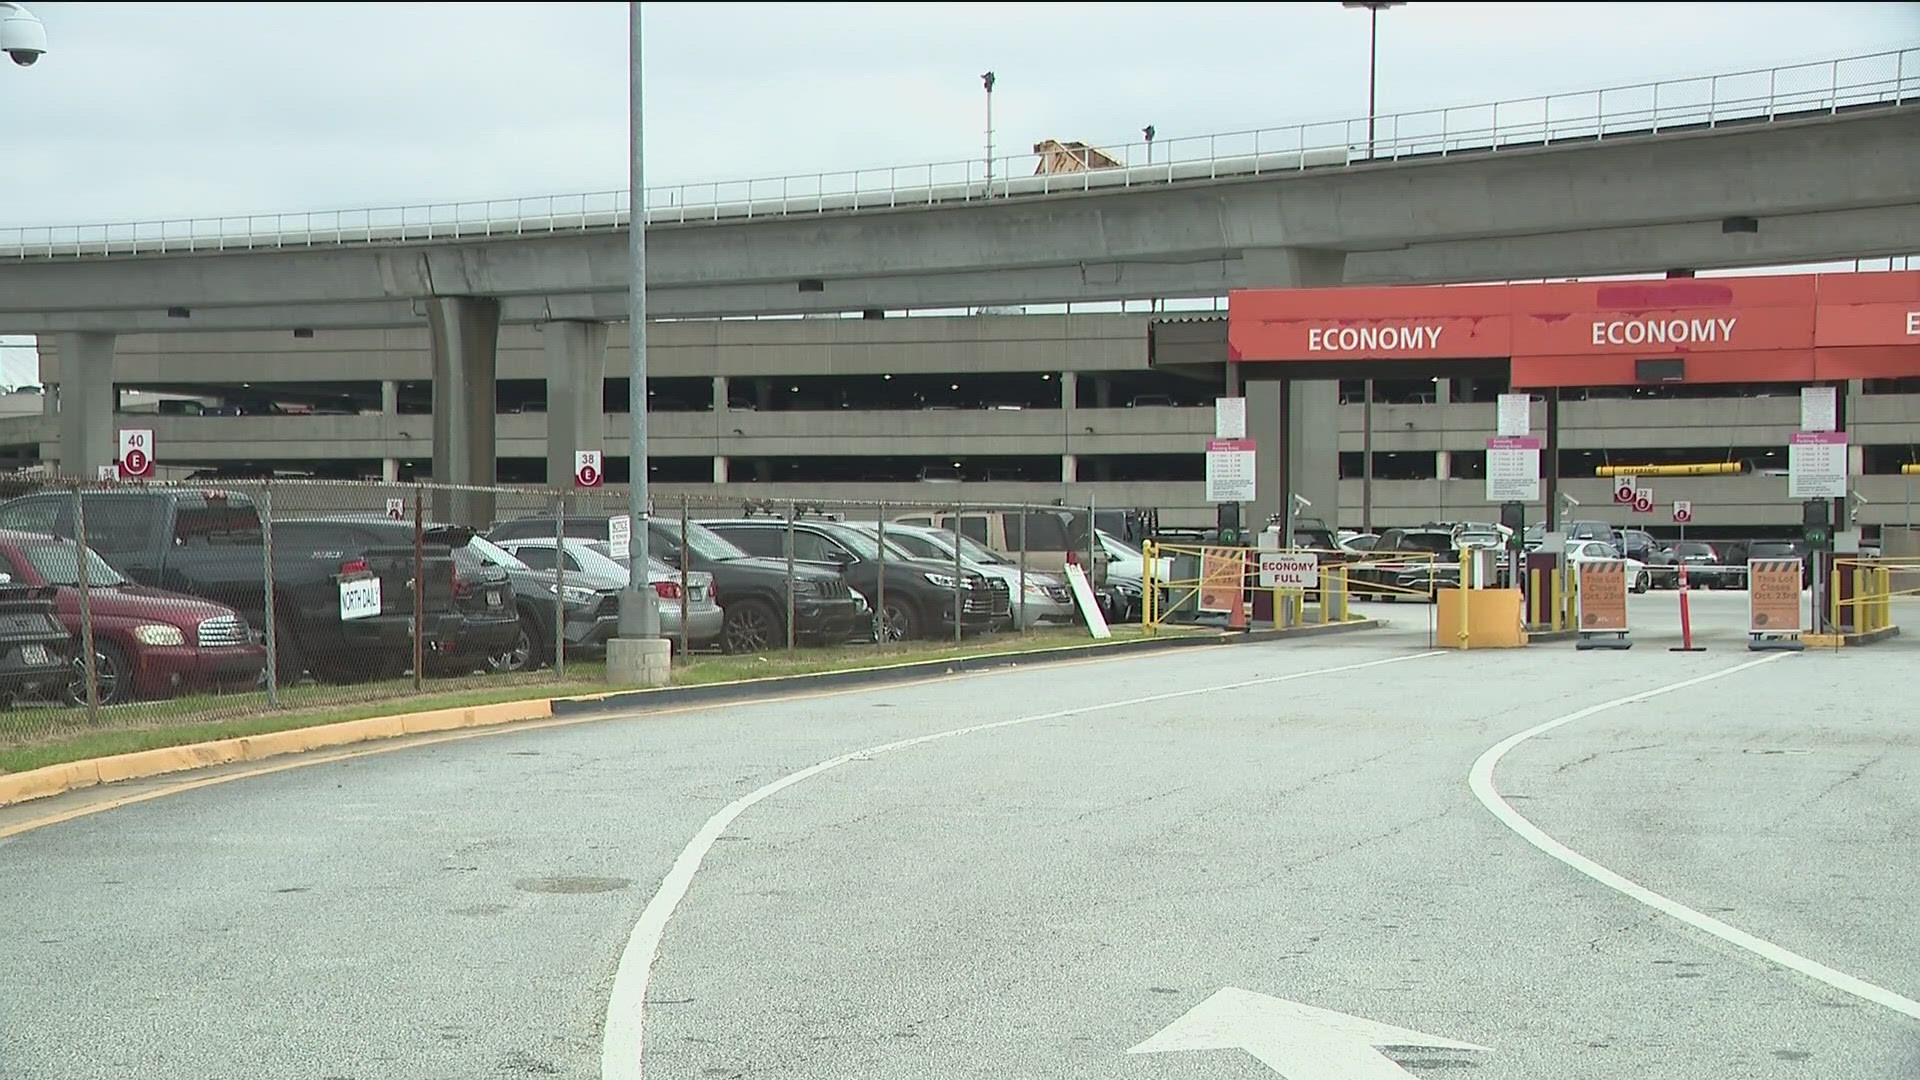 Parking access gates added to Lenox Square